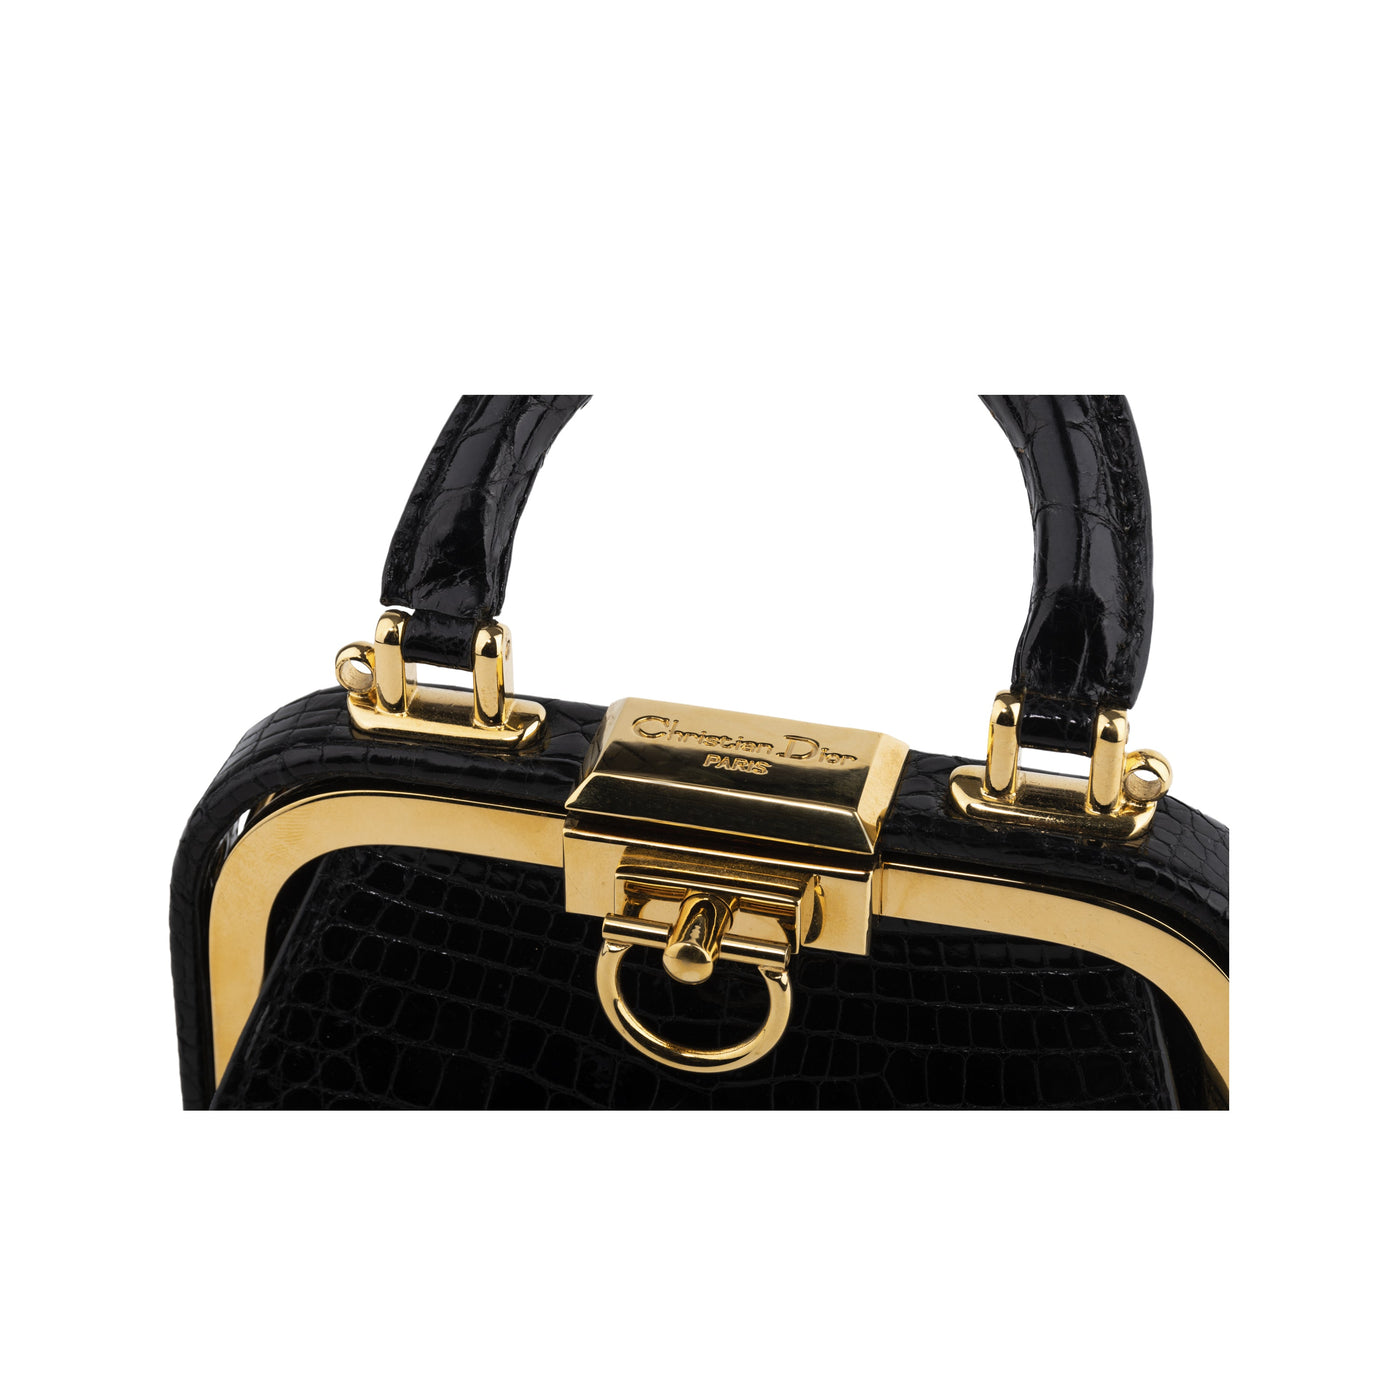 Dior black alligator leather mini bag. "Doctor Bag" style with snap closure and golden details. Interior lined in black calfskin with pocket pre-owned nft